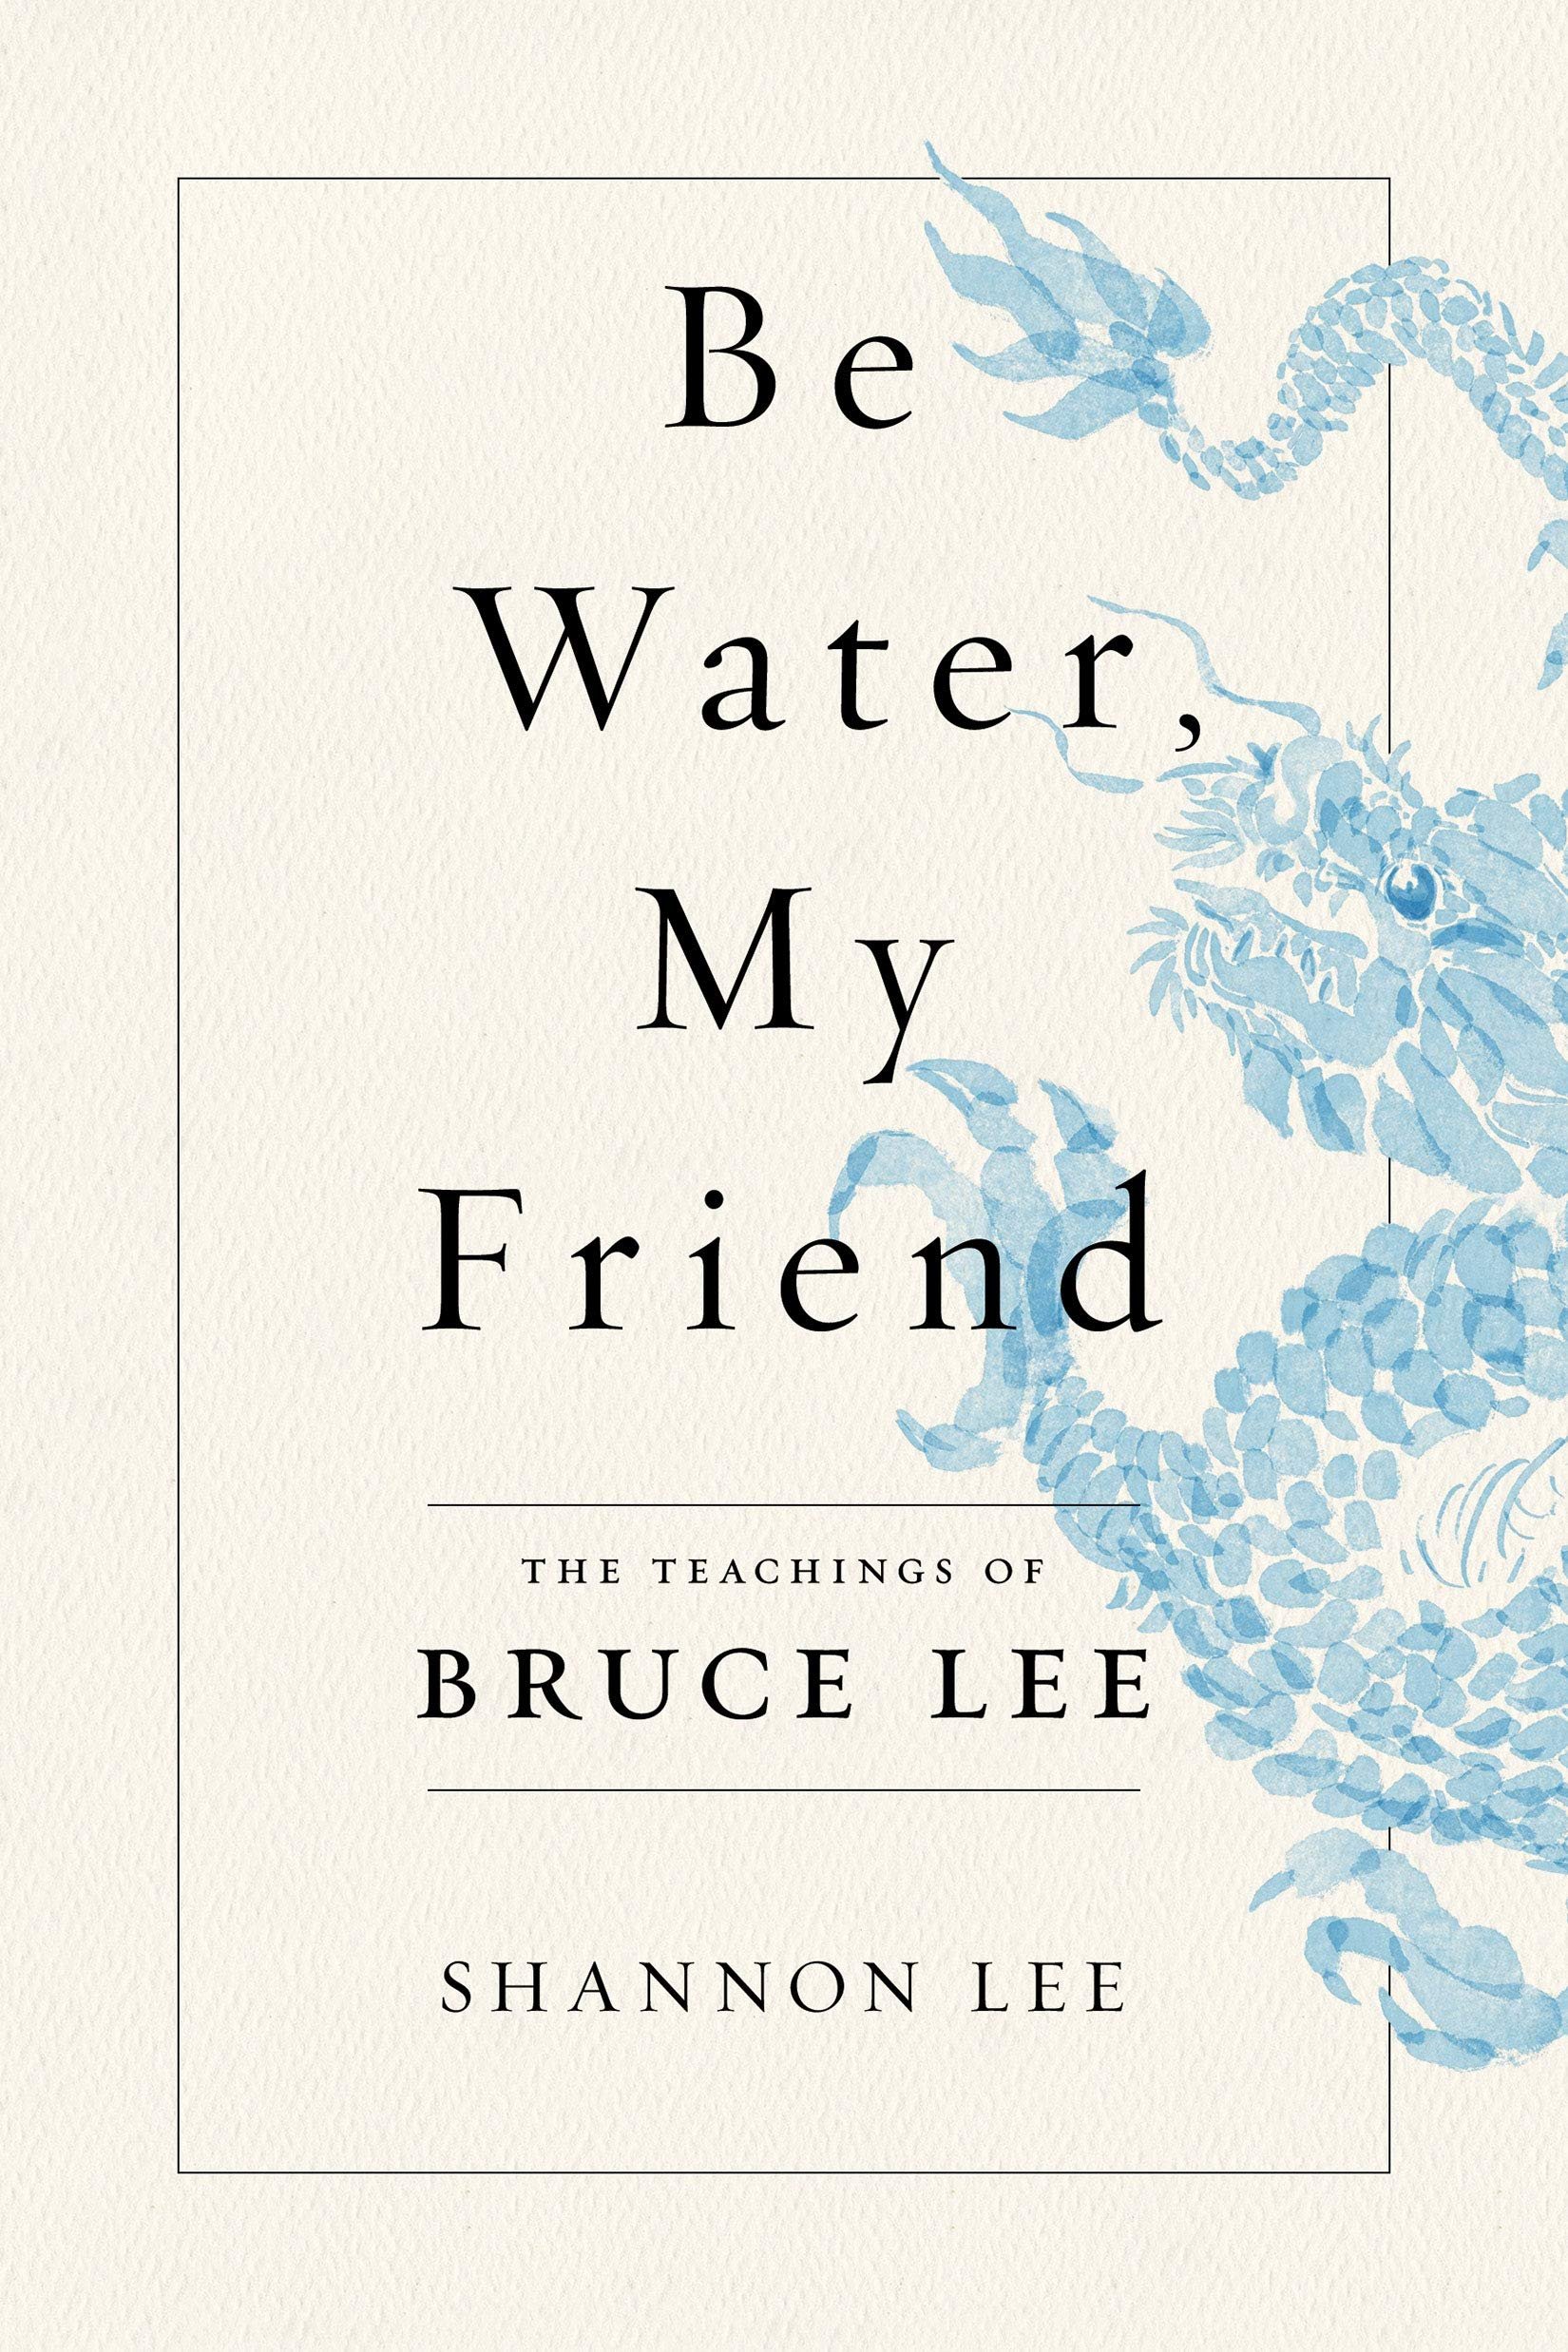 Be Water My Friend by Shannon Lee